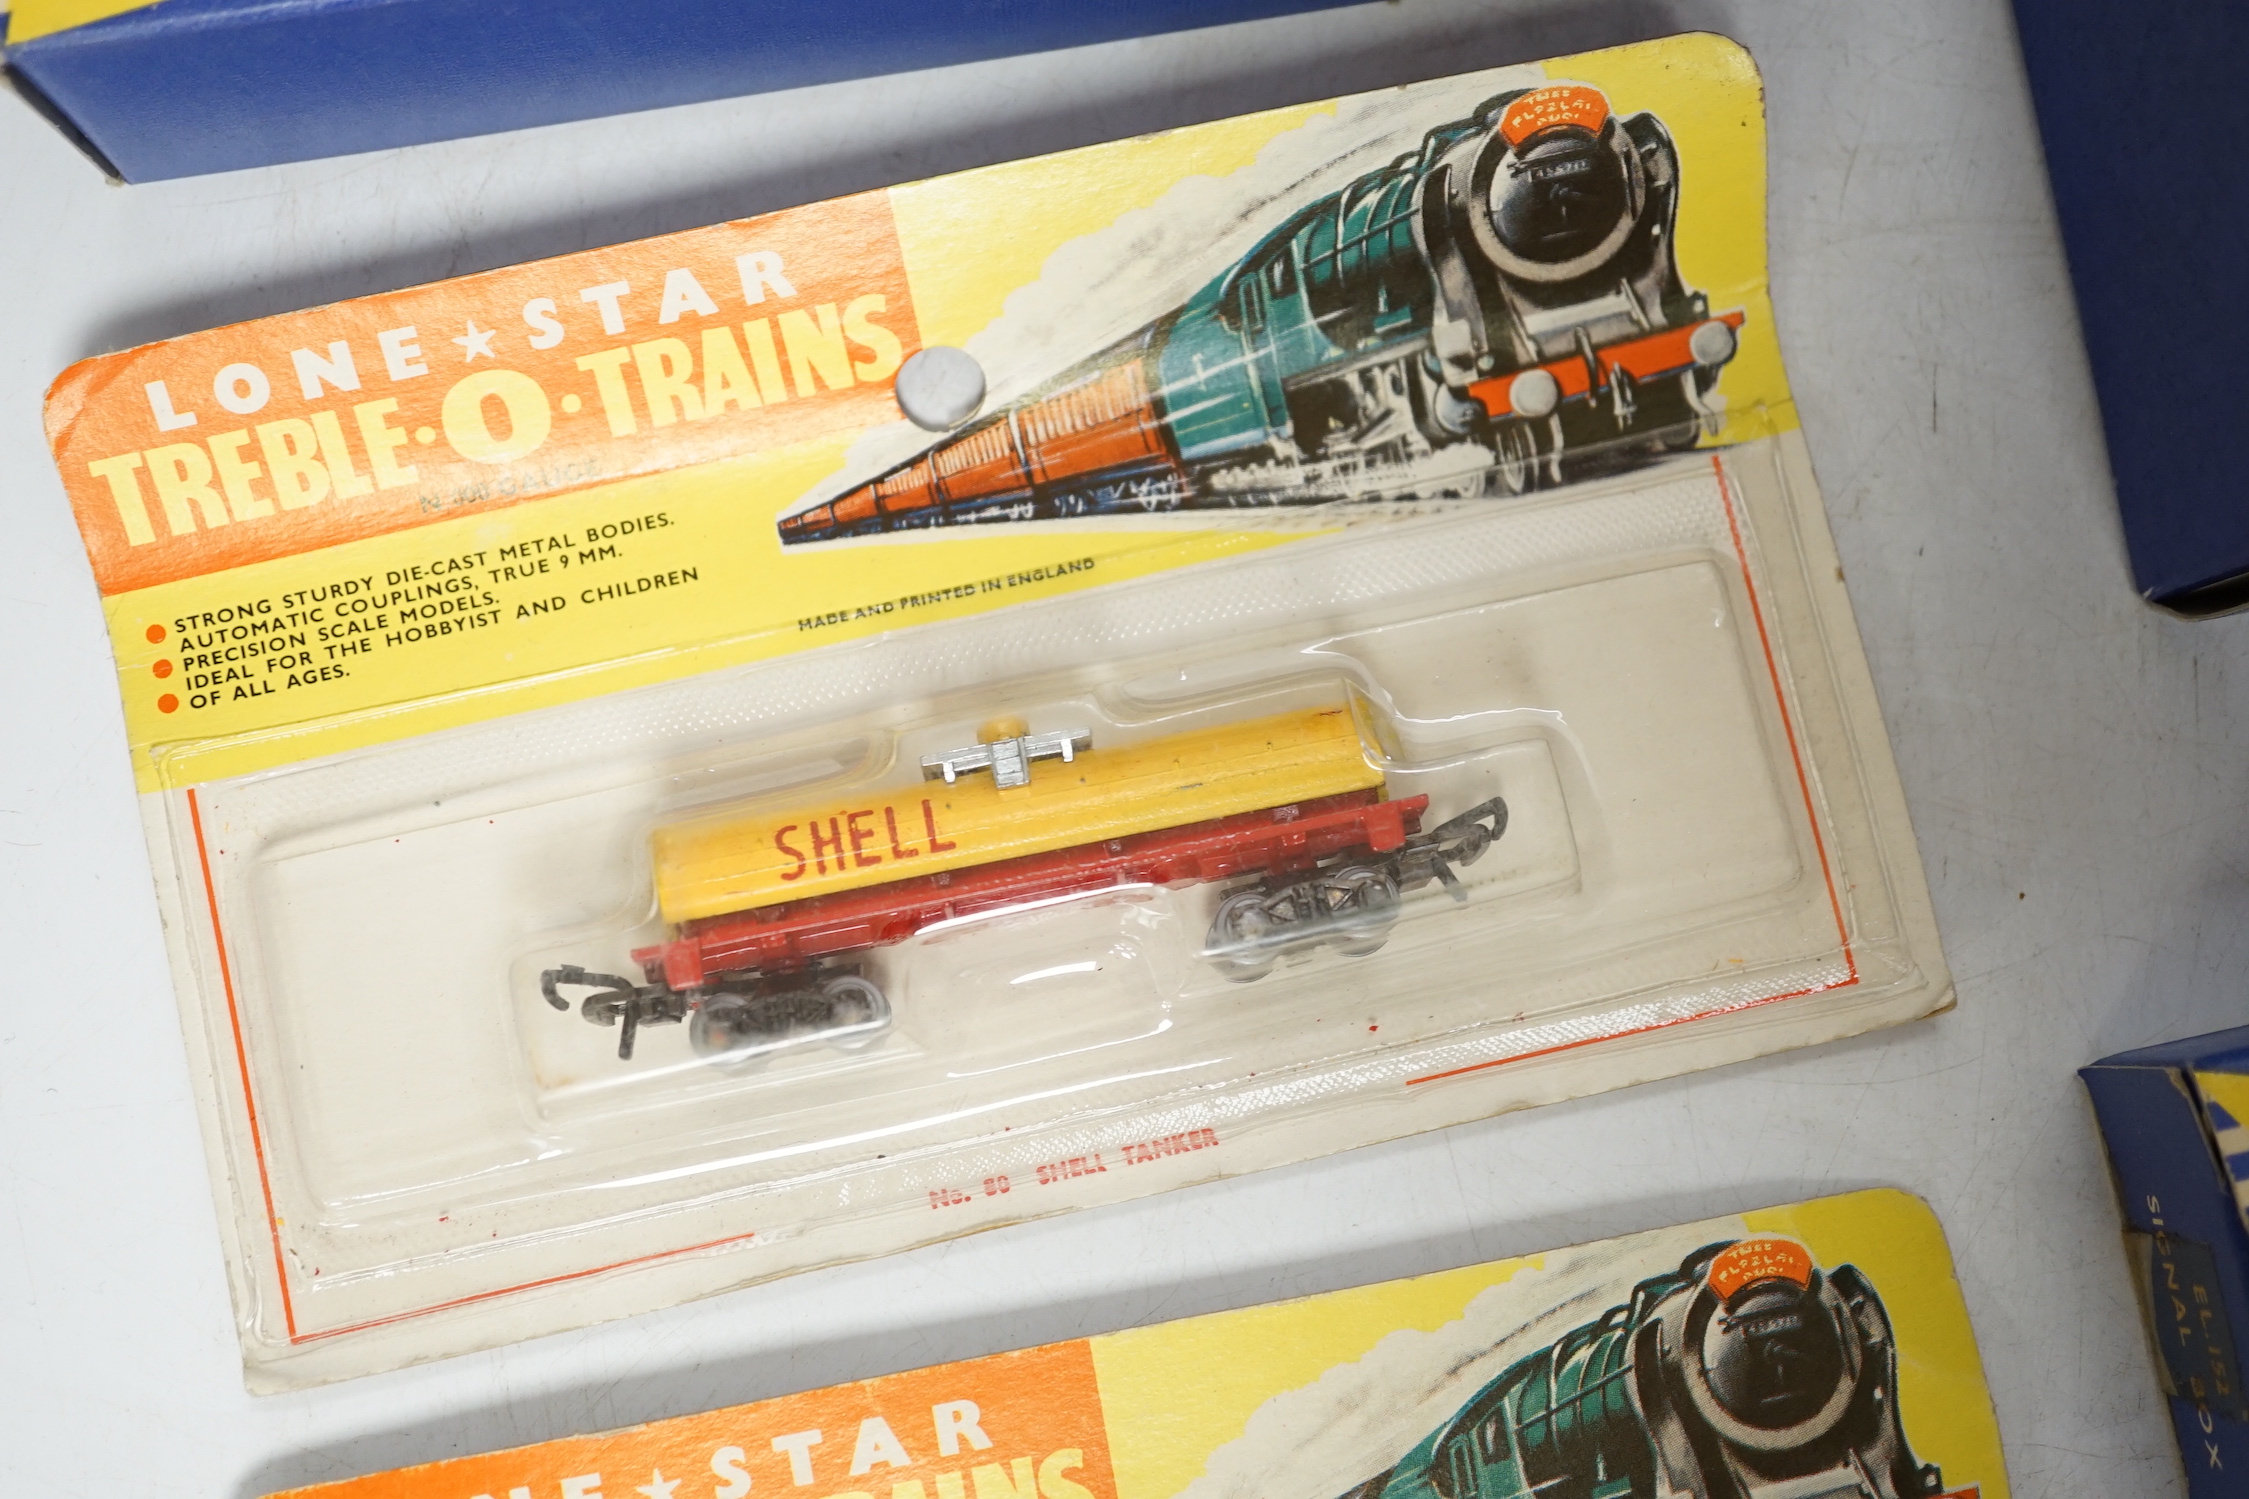 Sixty-two boxed items of Lone Star 000 gauge model railway including; a tunnel, Brake End Coaches, bogie wagons, station platforms, platform extensions, signal boxes, box vans, and telegraph poles